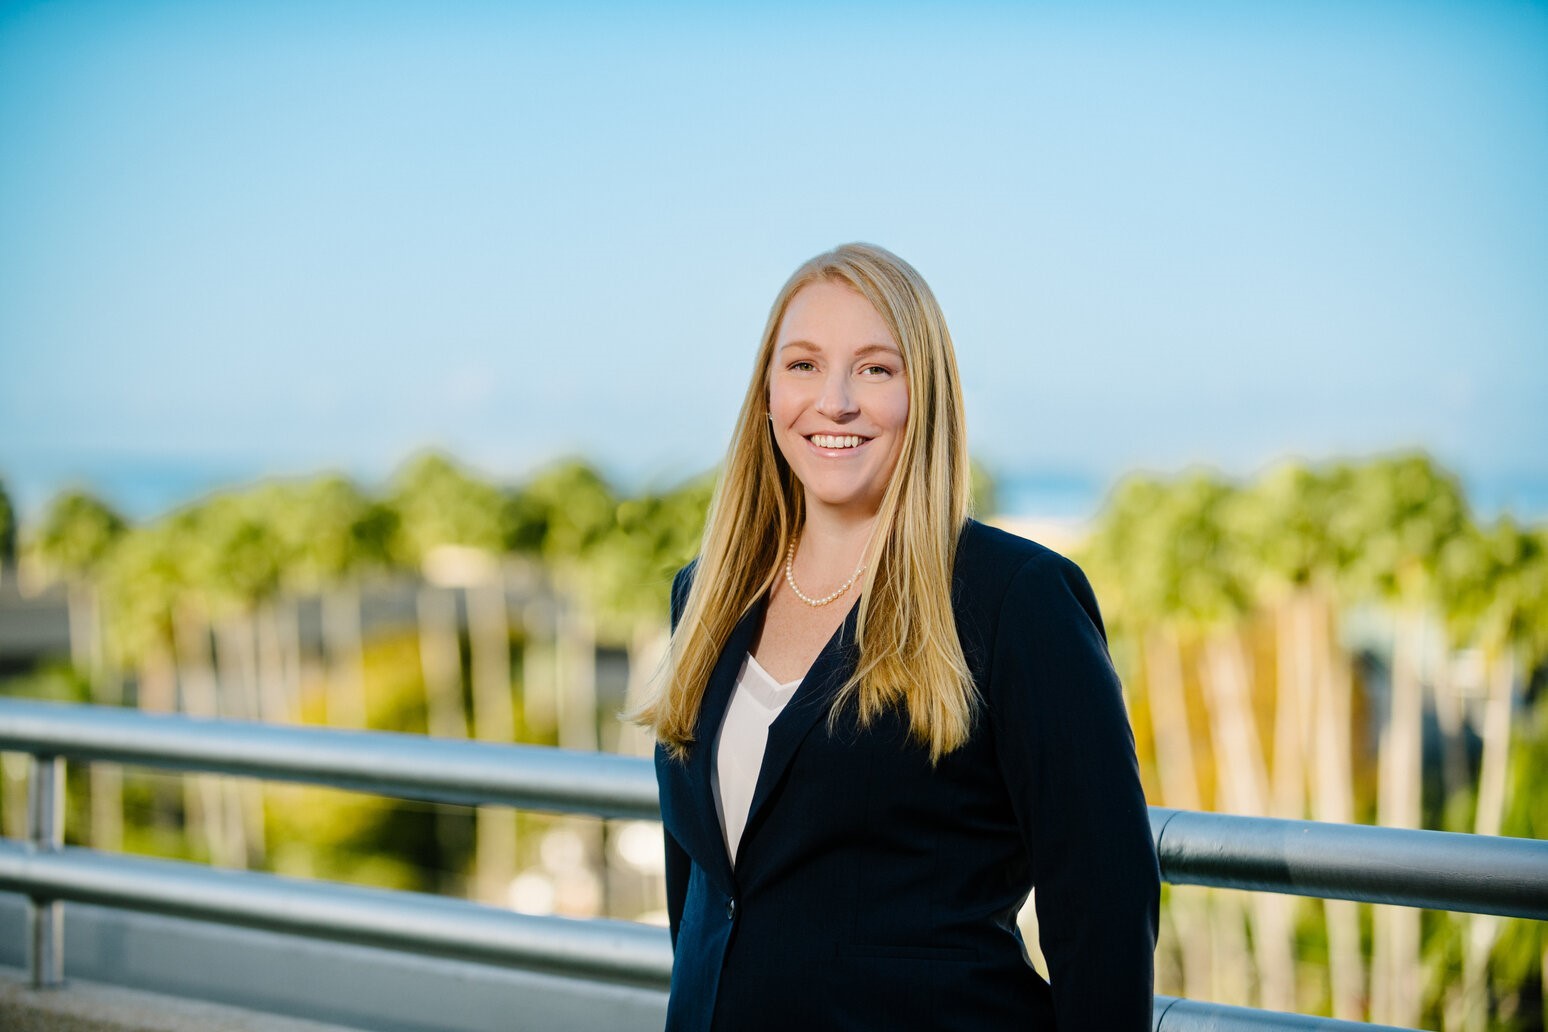 Courtesy. Gina Griffith has joined Hall Booth Smith's Tampa office as an associate.